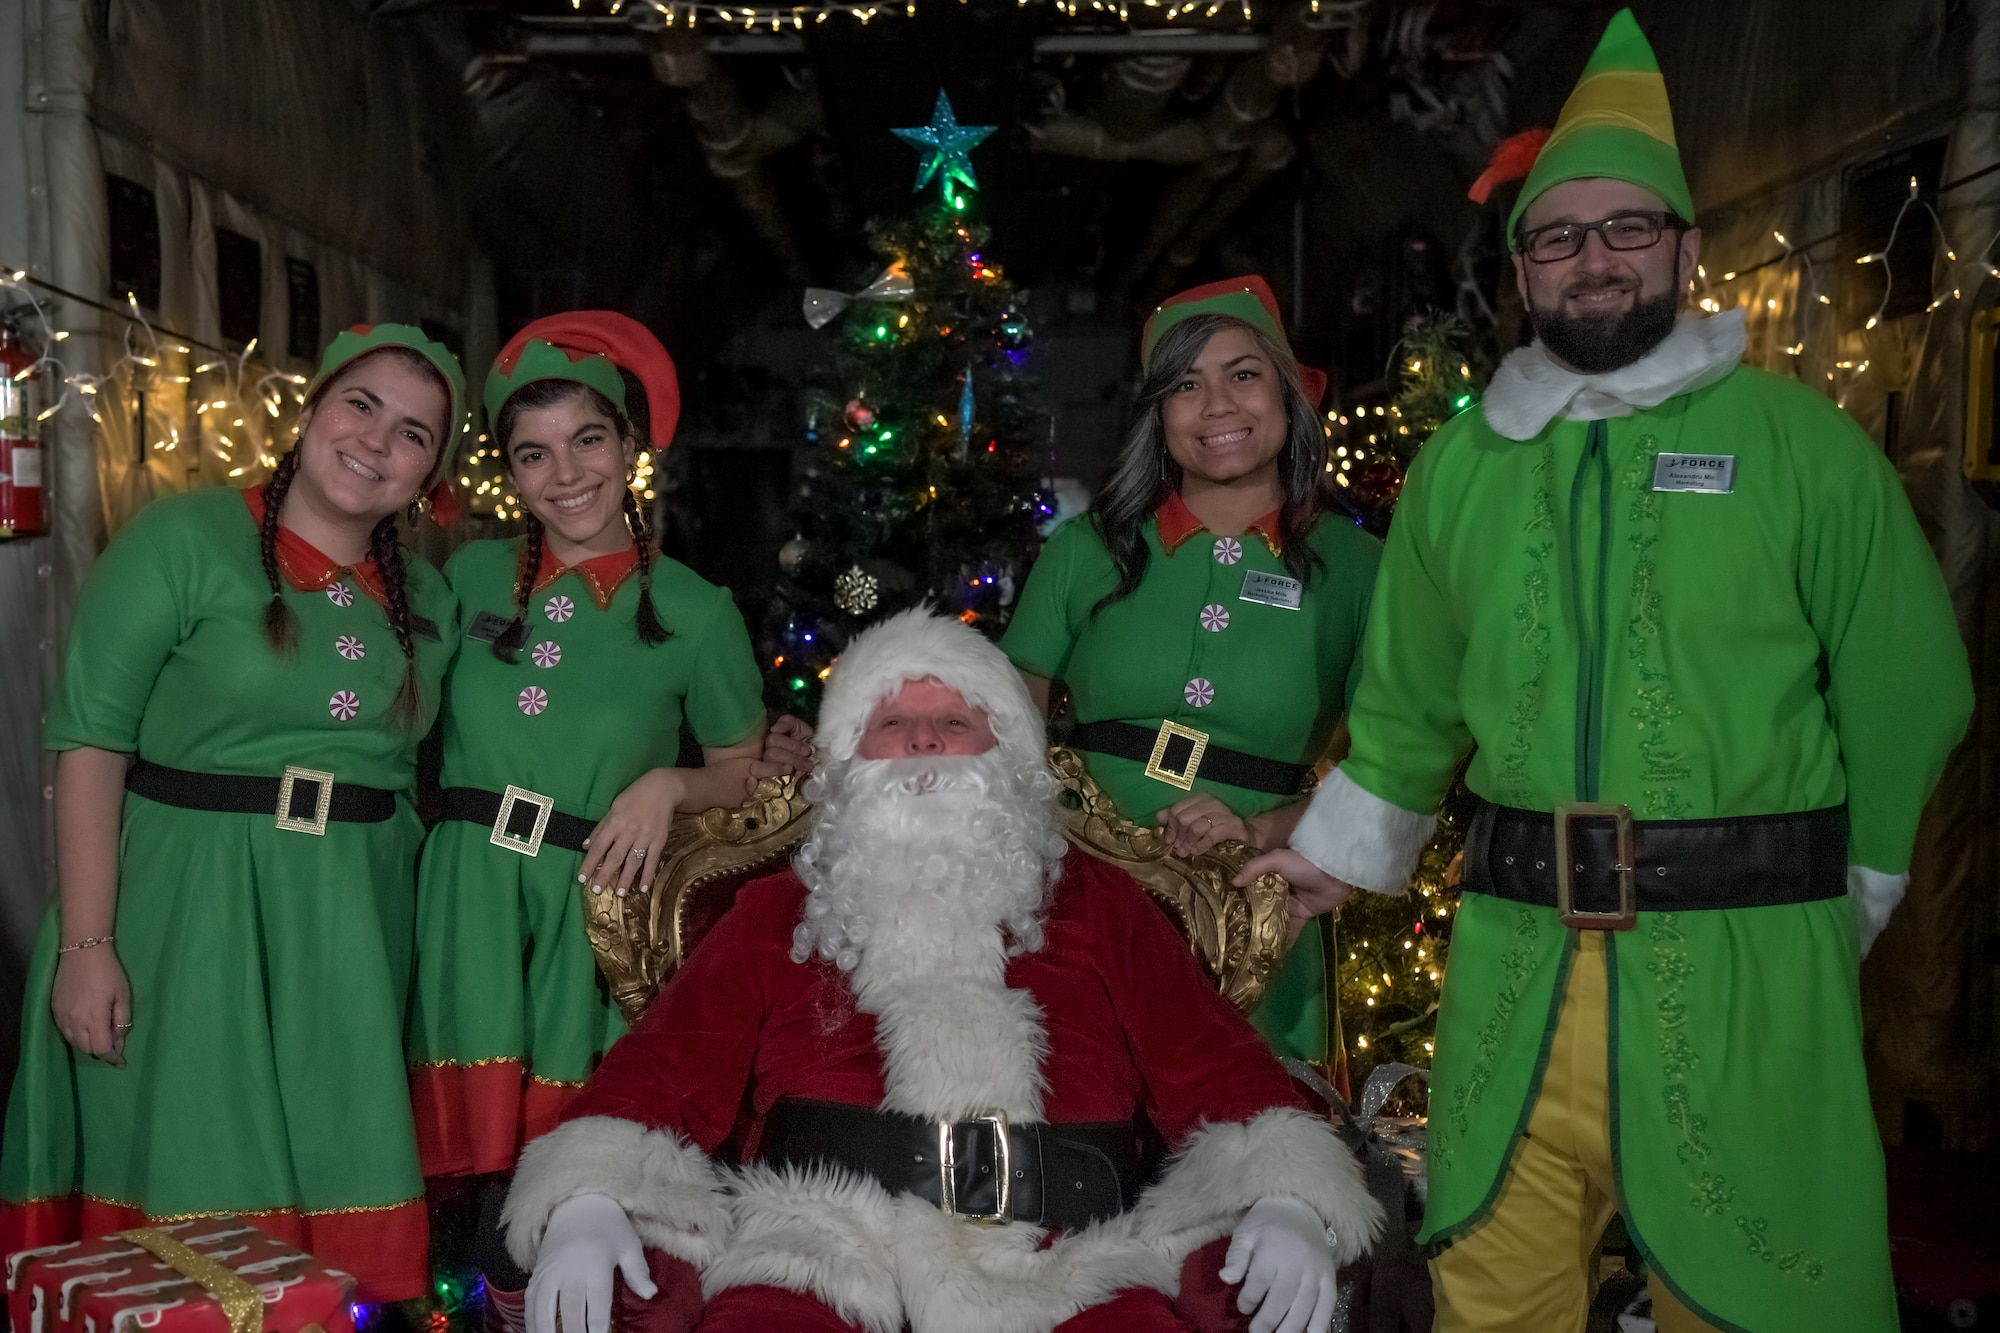 Elves stand with Santa